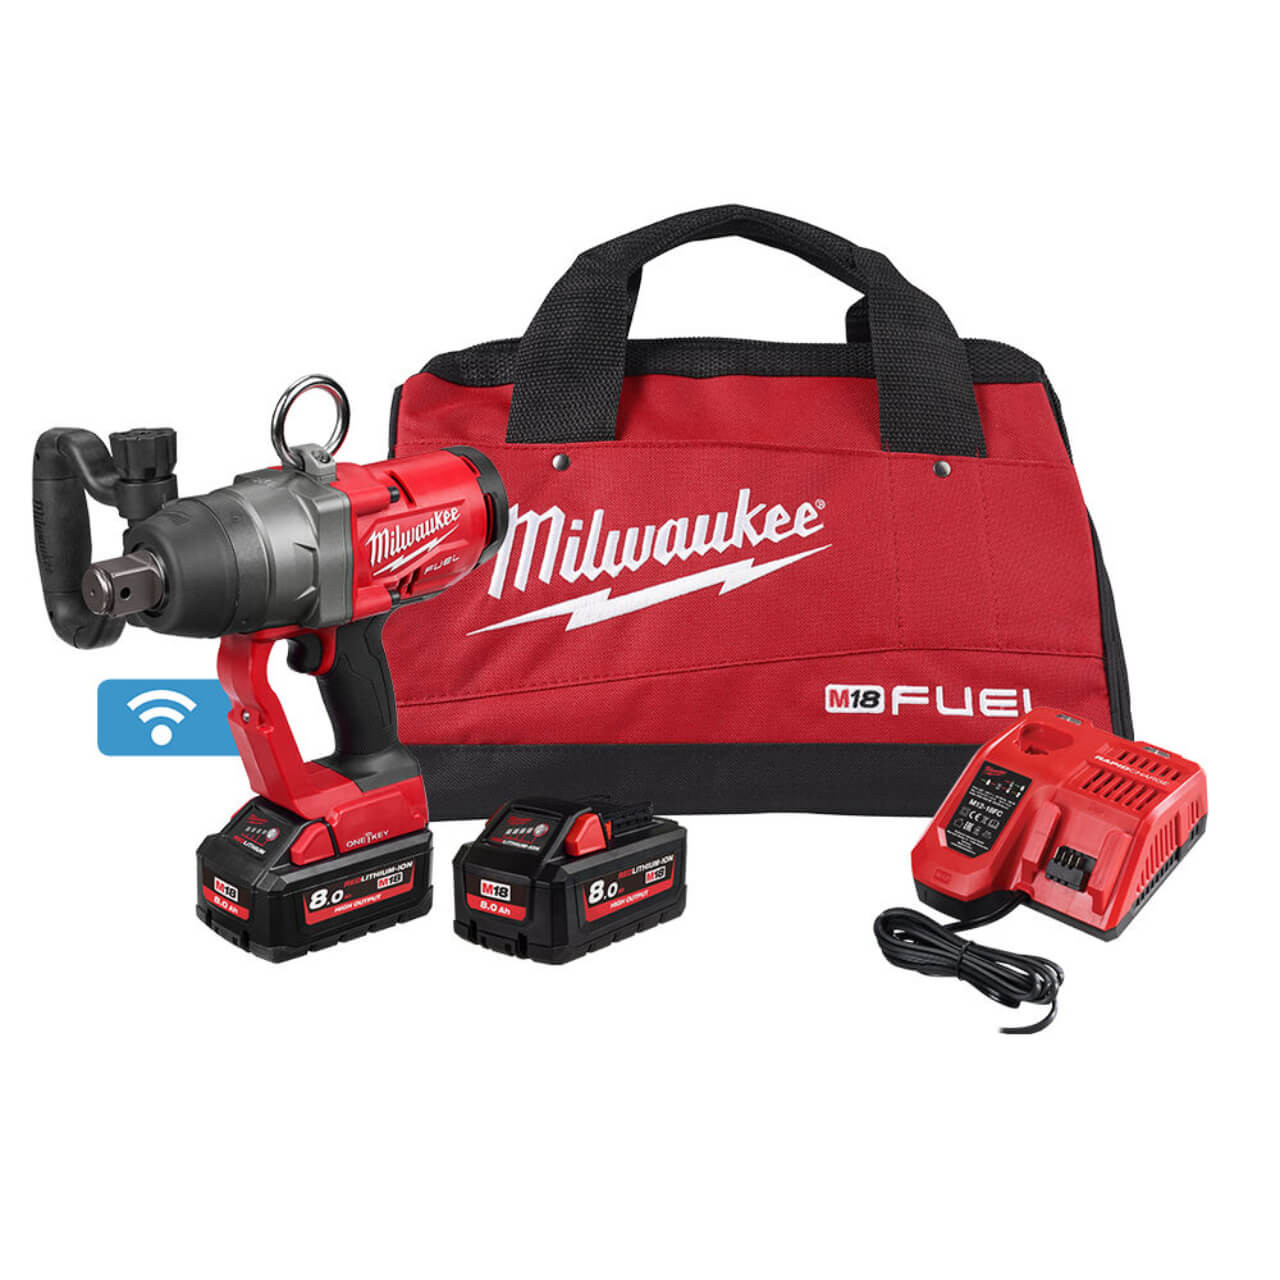 Milwaukee M18 Fuel One-Key Cordless 1” High Torque Impact Wrench With Friction Ring Kit